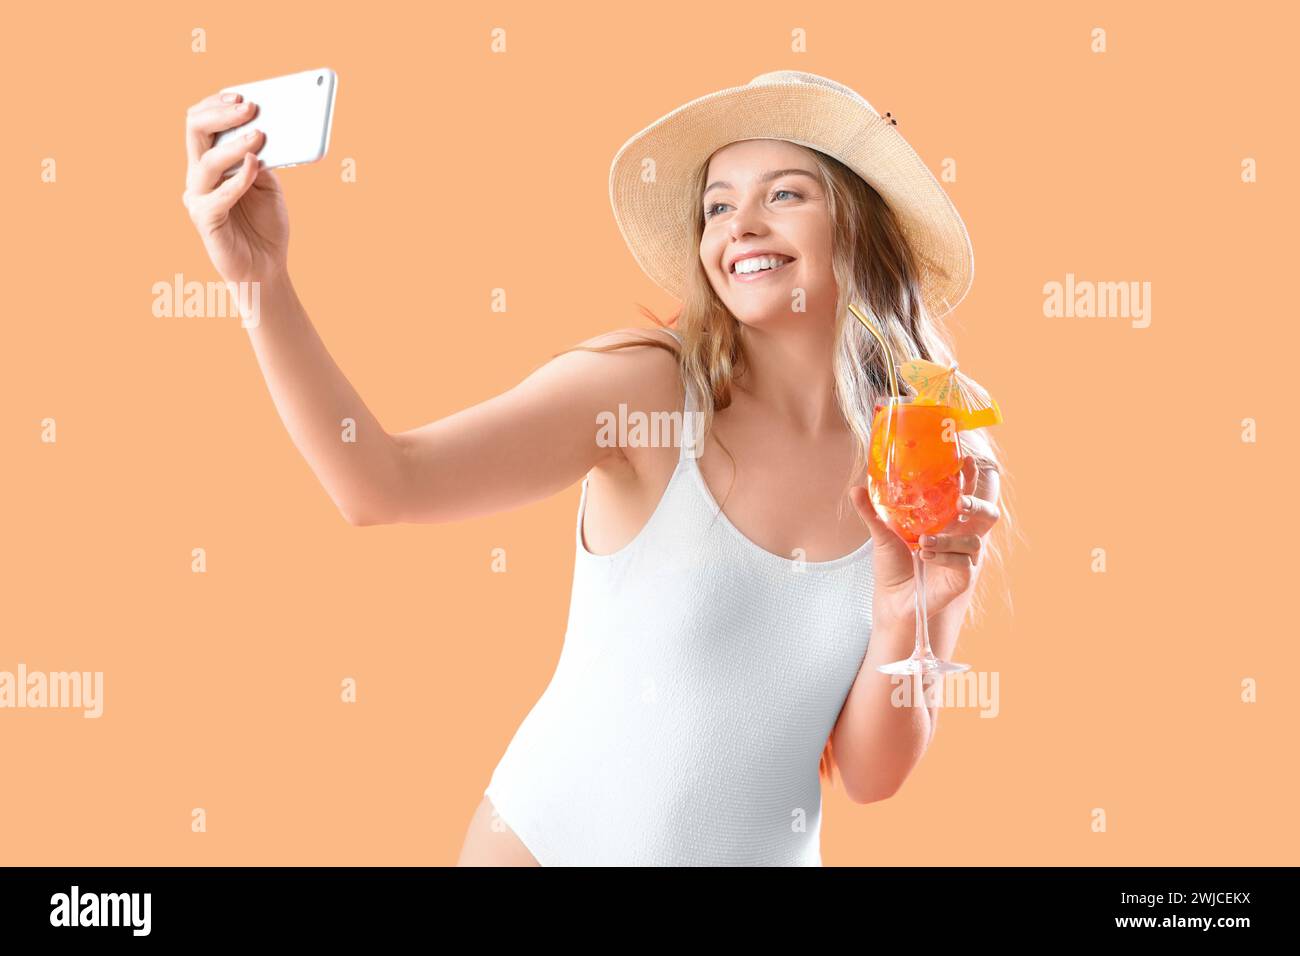 Beautiful young woman in swimsuit with glass of tasty aperol spritz taking selfie on orange background Stock Photo